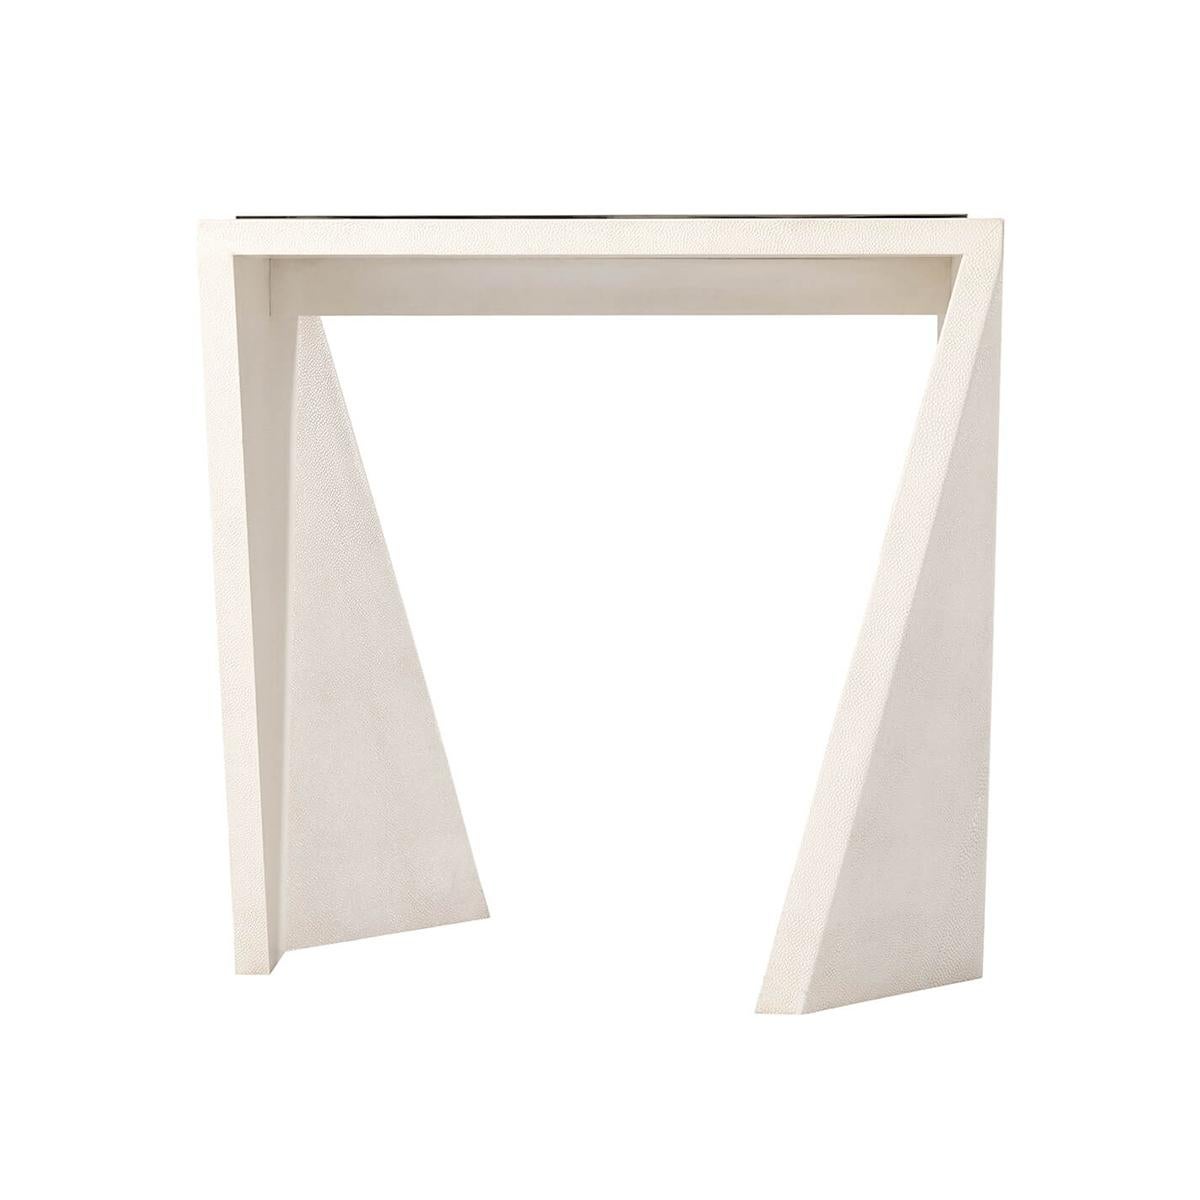  a shagreen embossed ivory leather wrapped around a modular modern side table with a nickel-plated molded gallery detail to the rectangular top. The base shape an irregular angled geometric form.

Dimensions: 24